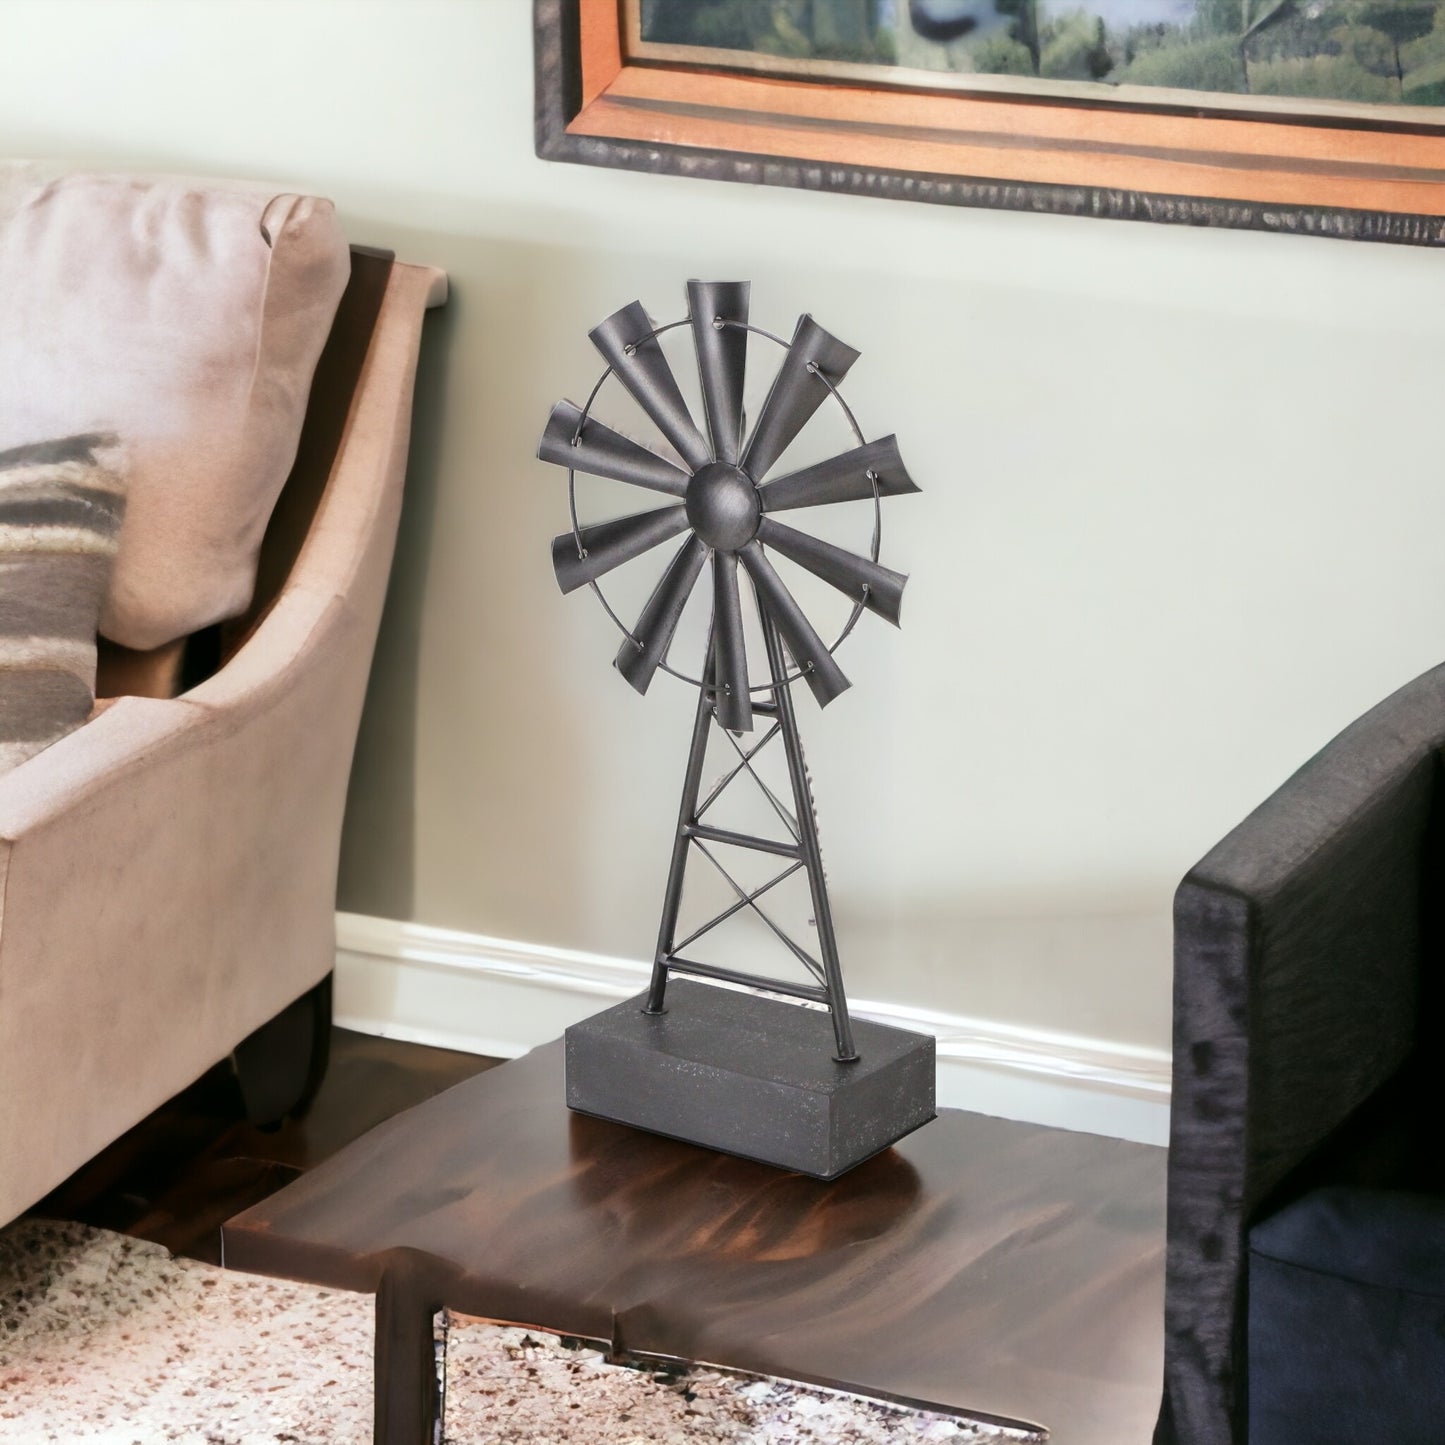 21" Gray Metal Windmill Hand Painted Sculpture